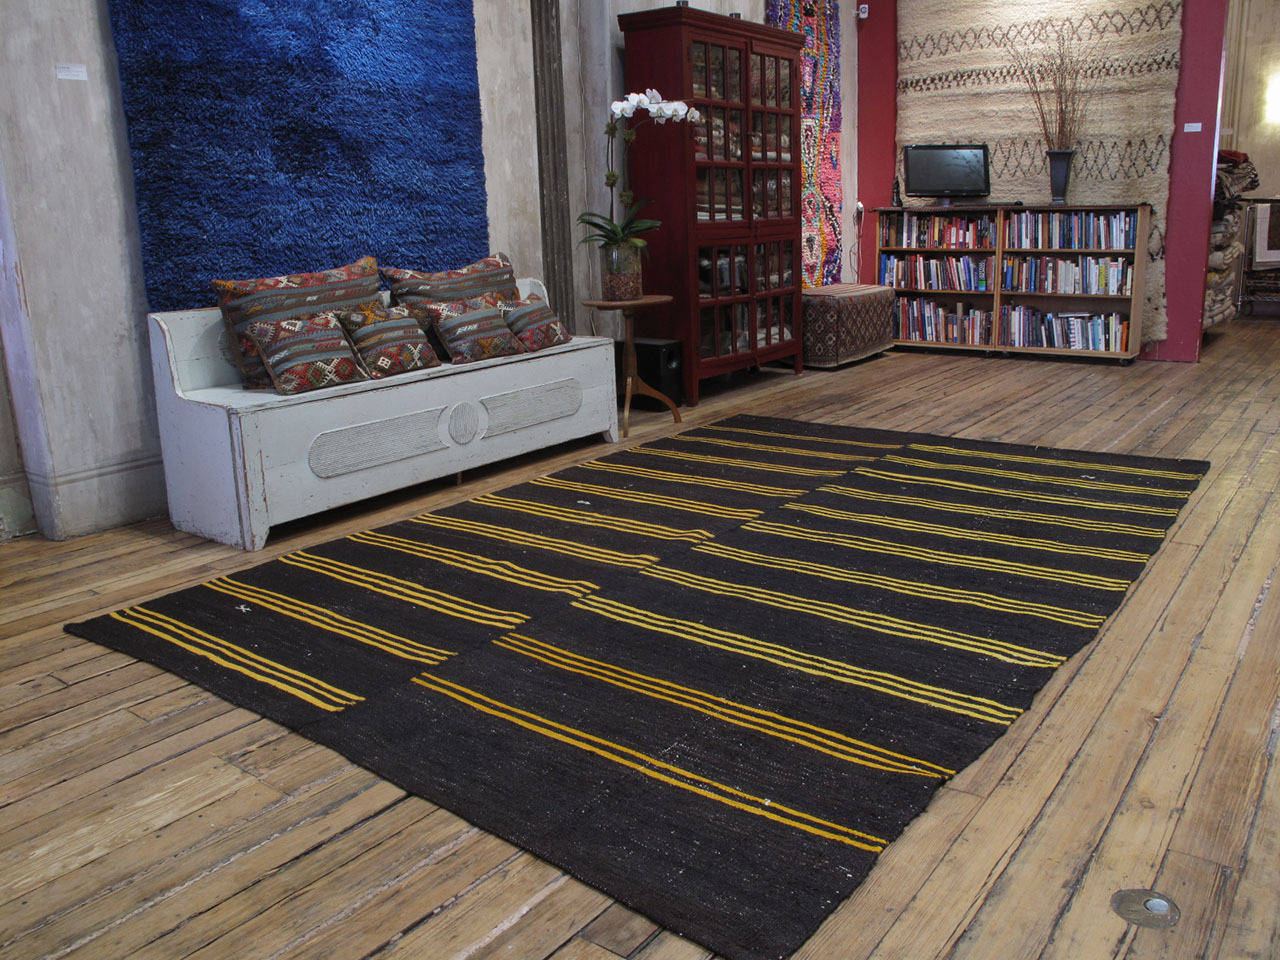 A large tribal floor cover from Southeastern Turkey, consisting of two panels stitched together. Woven with tightly spun, dark brown goat hair, decorated with bright yellow stripes and a few scattered brocaded motifs, this is a simple and Primitive